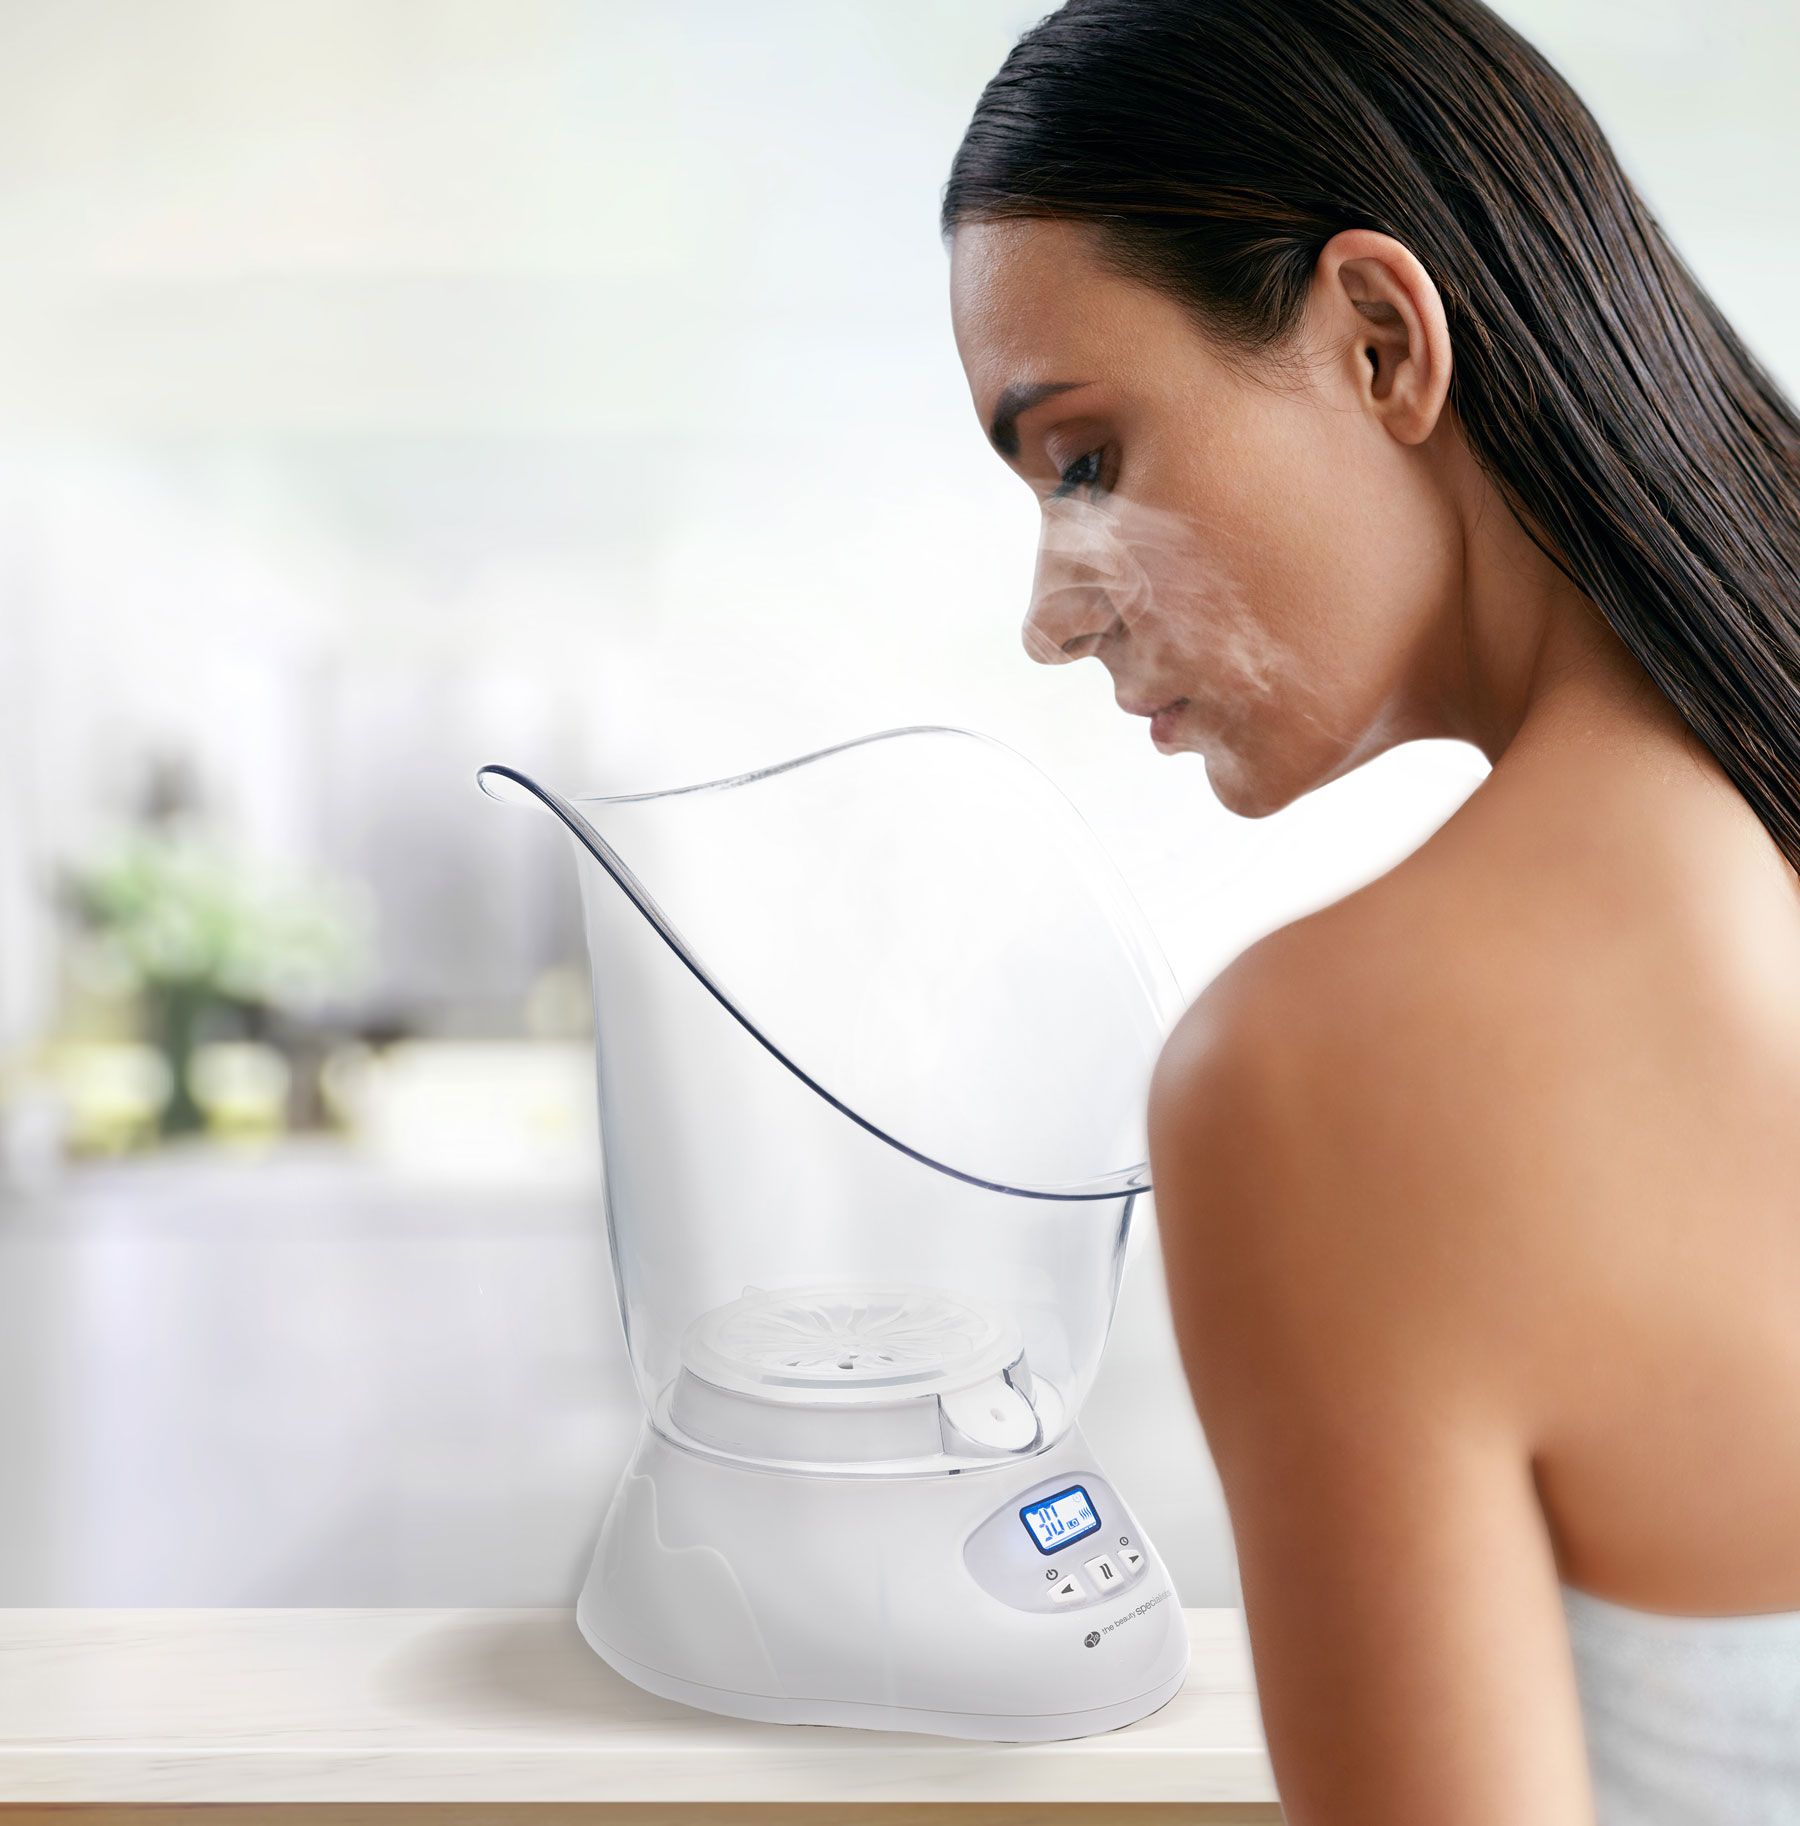 Facial Saunas: The Steamy Secret to Detoxified and Glowing Skin